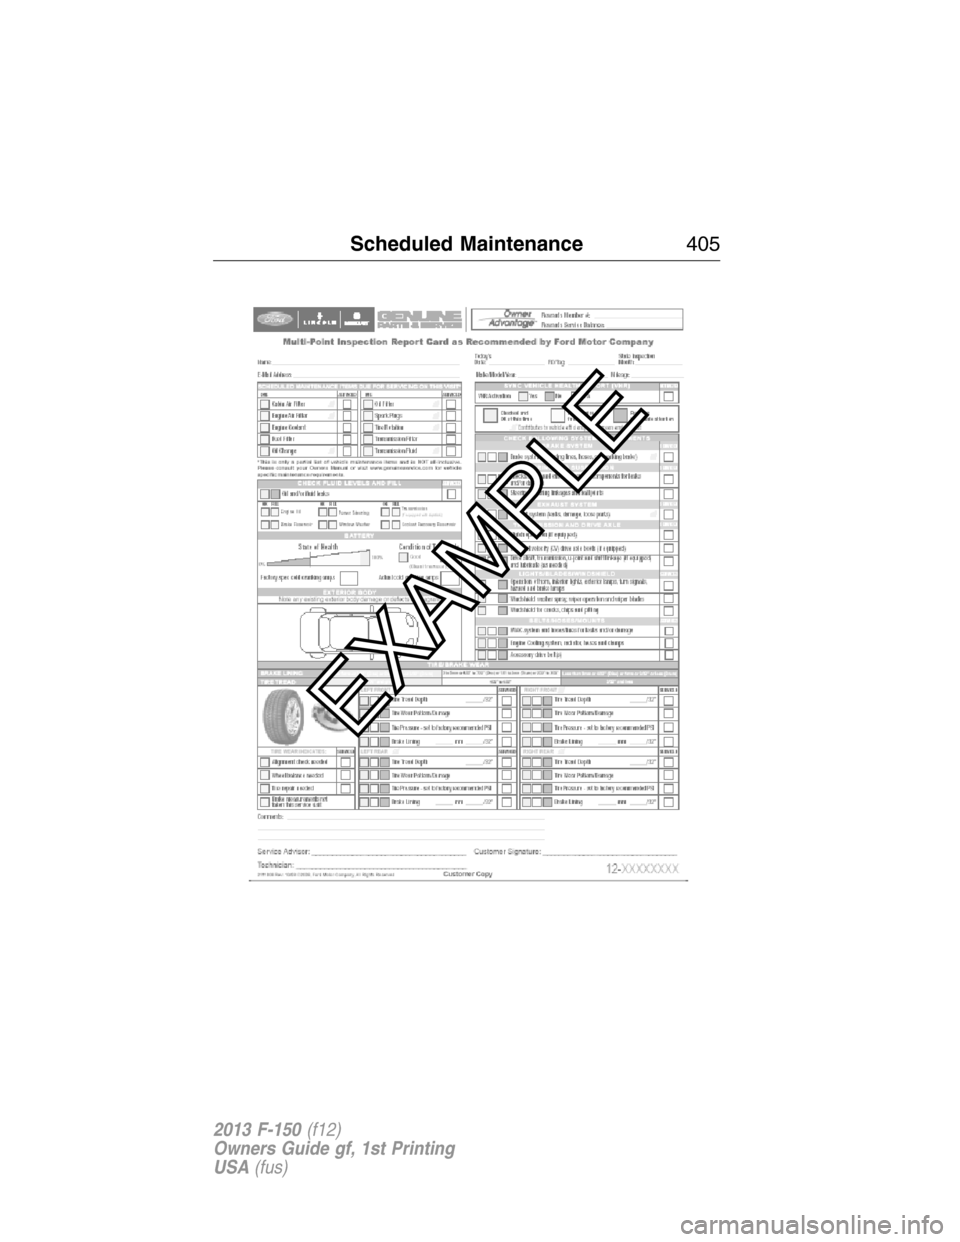 FORD F150 2013 12.G Repair Manual Scheduled Maintenance405
2013 F-150(f12)
Owners Guide gf, 1st Printing
USA(fus) 